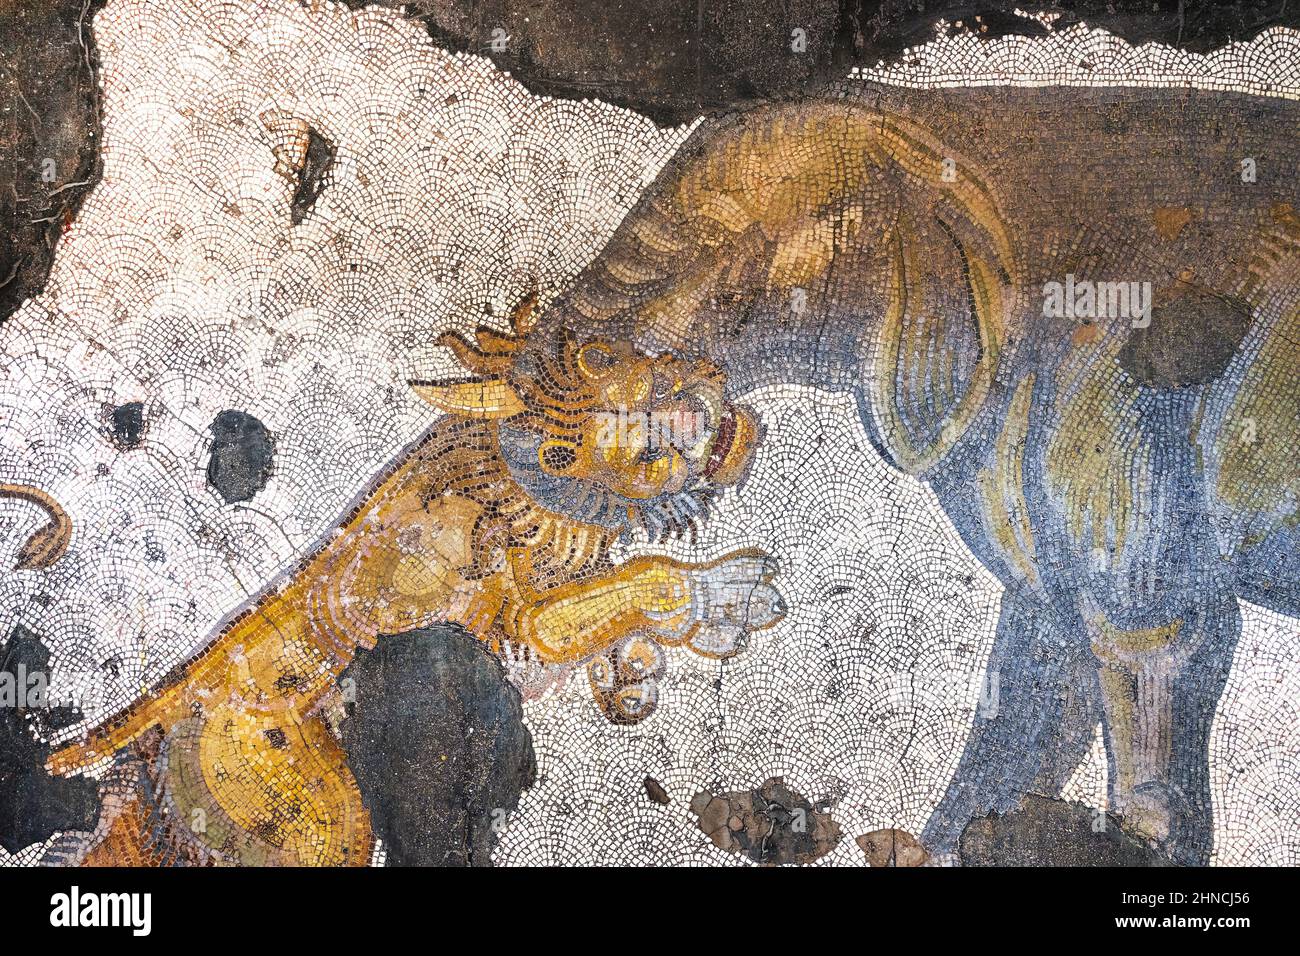 Lion fighting an elephant, mosaics from the Byzantine period (East Roman period) at the Great Palace of Constantinople. 4th-6th century. Stock Photo